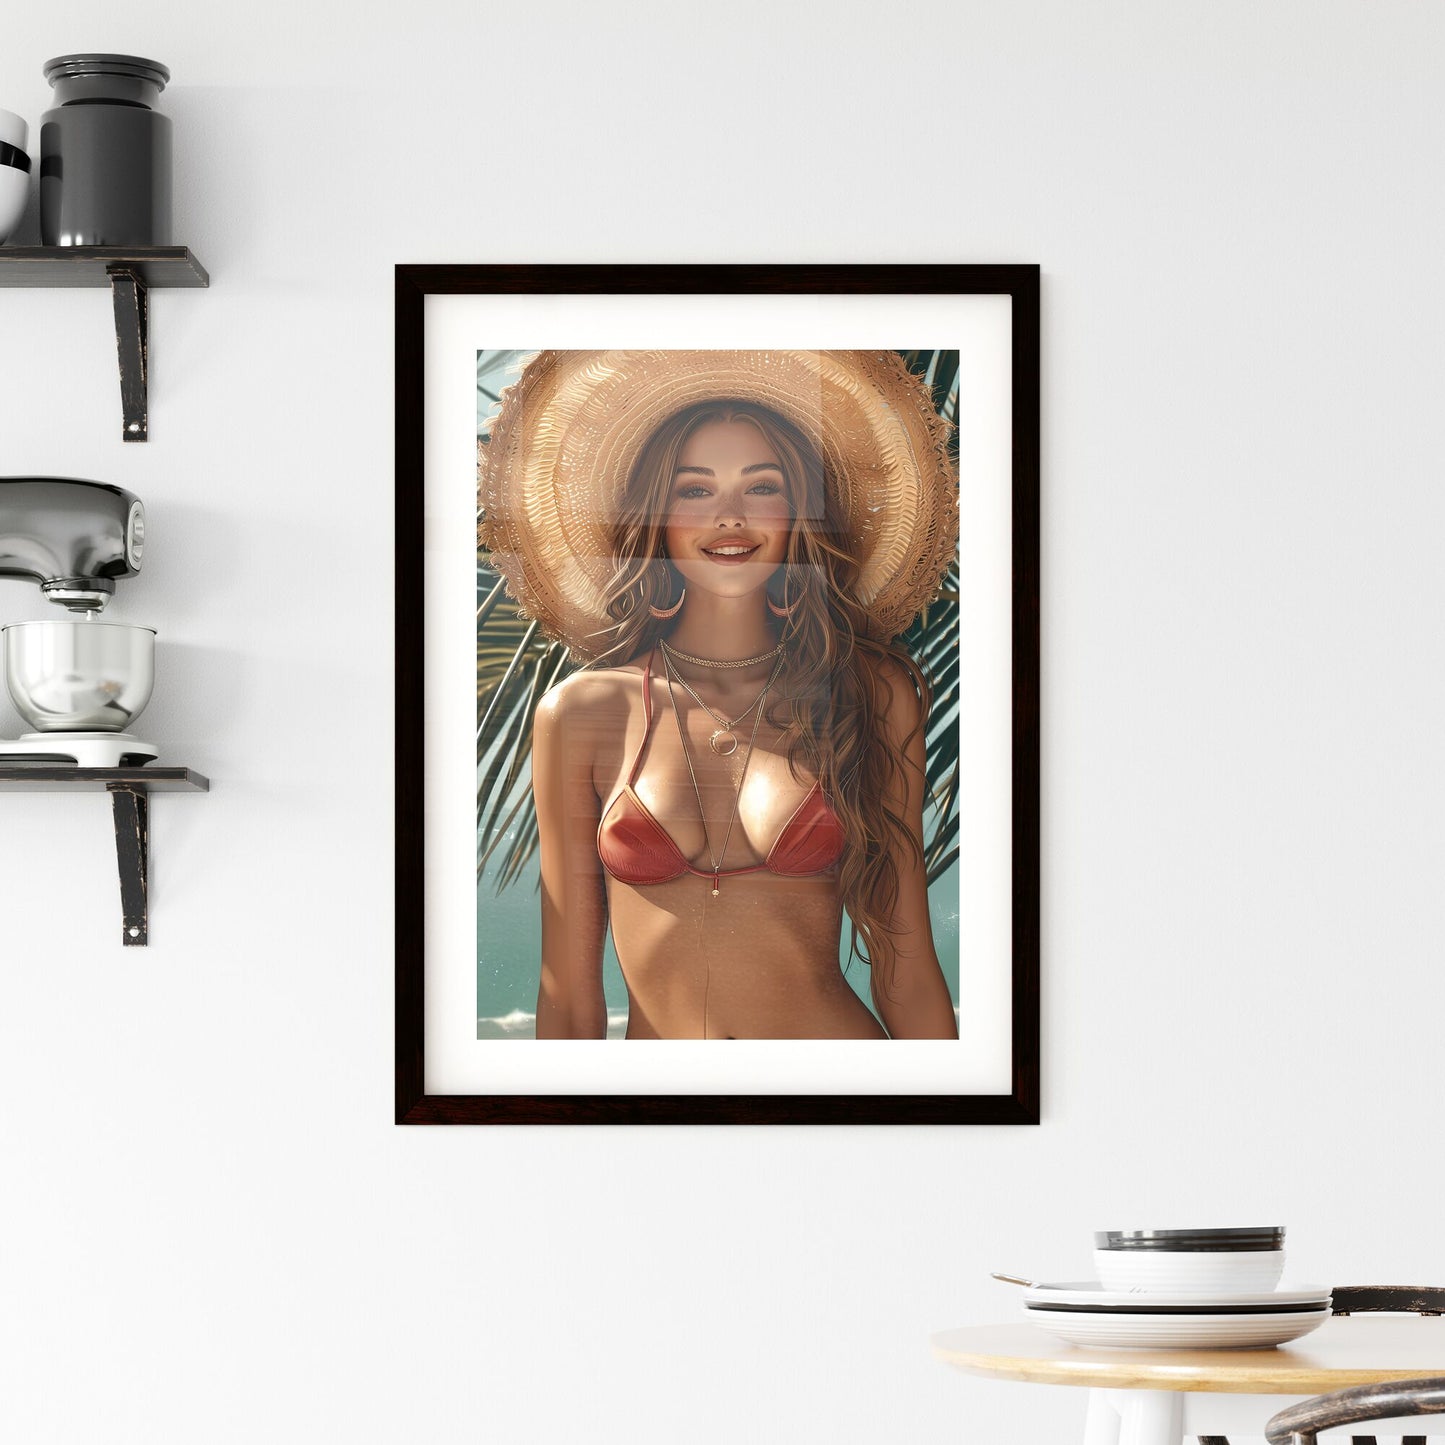 Retro poster - Art print of a woman wearing a garment and hat Default Title